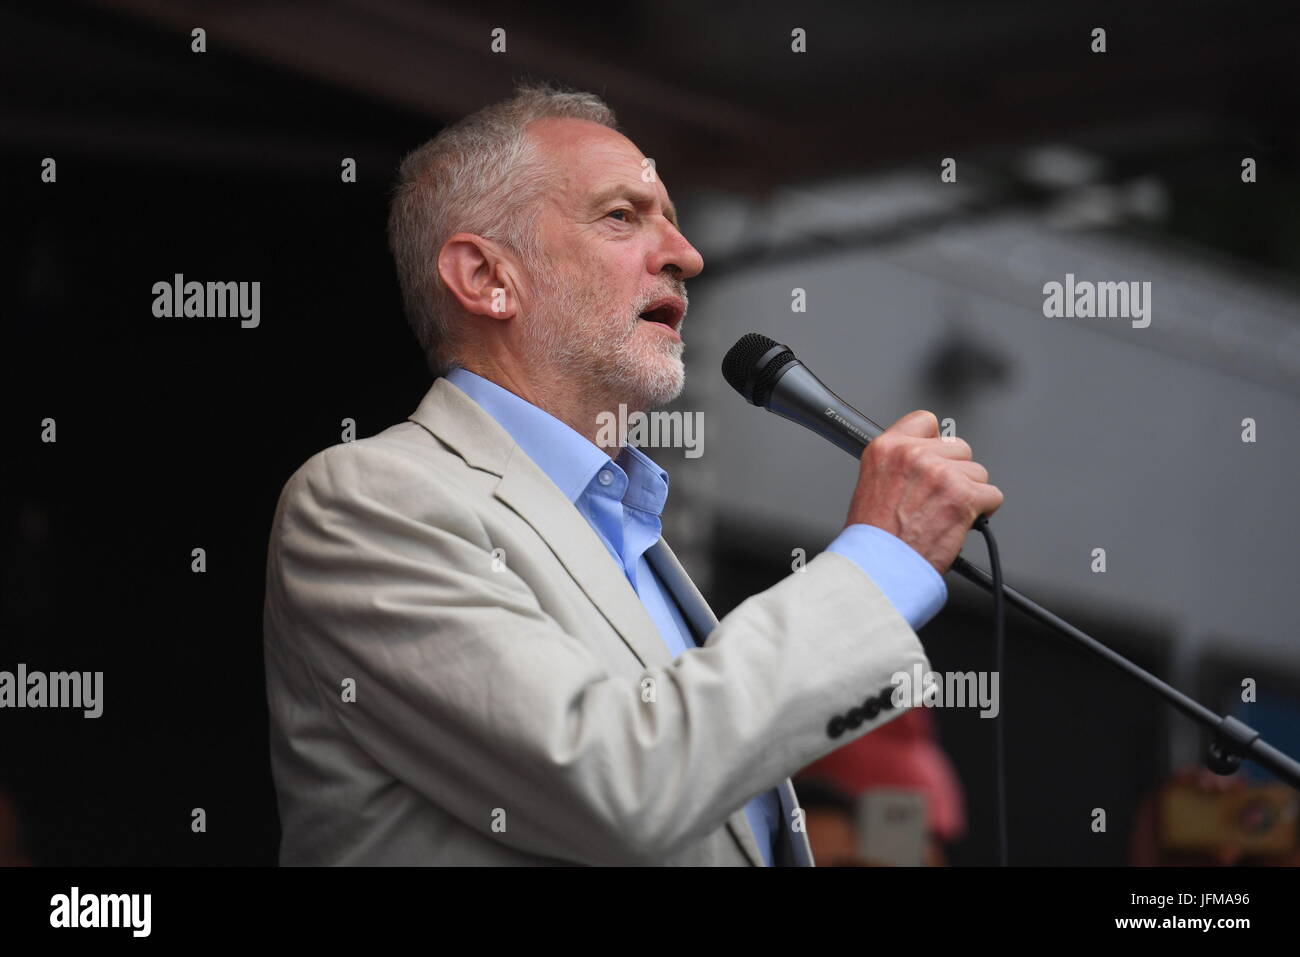 Labour leader Jeremy Corbyn addresses an anti-austerity rally in Parliament Square, London, after a march through the city as part of an anti-austerity protest. Stock Photo